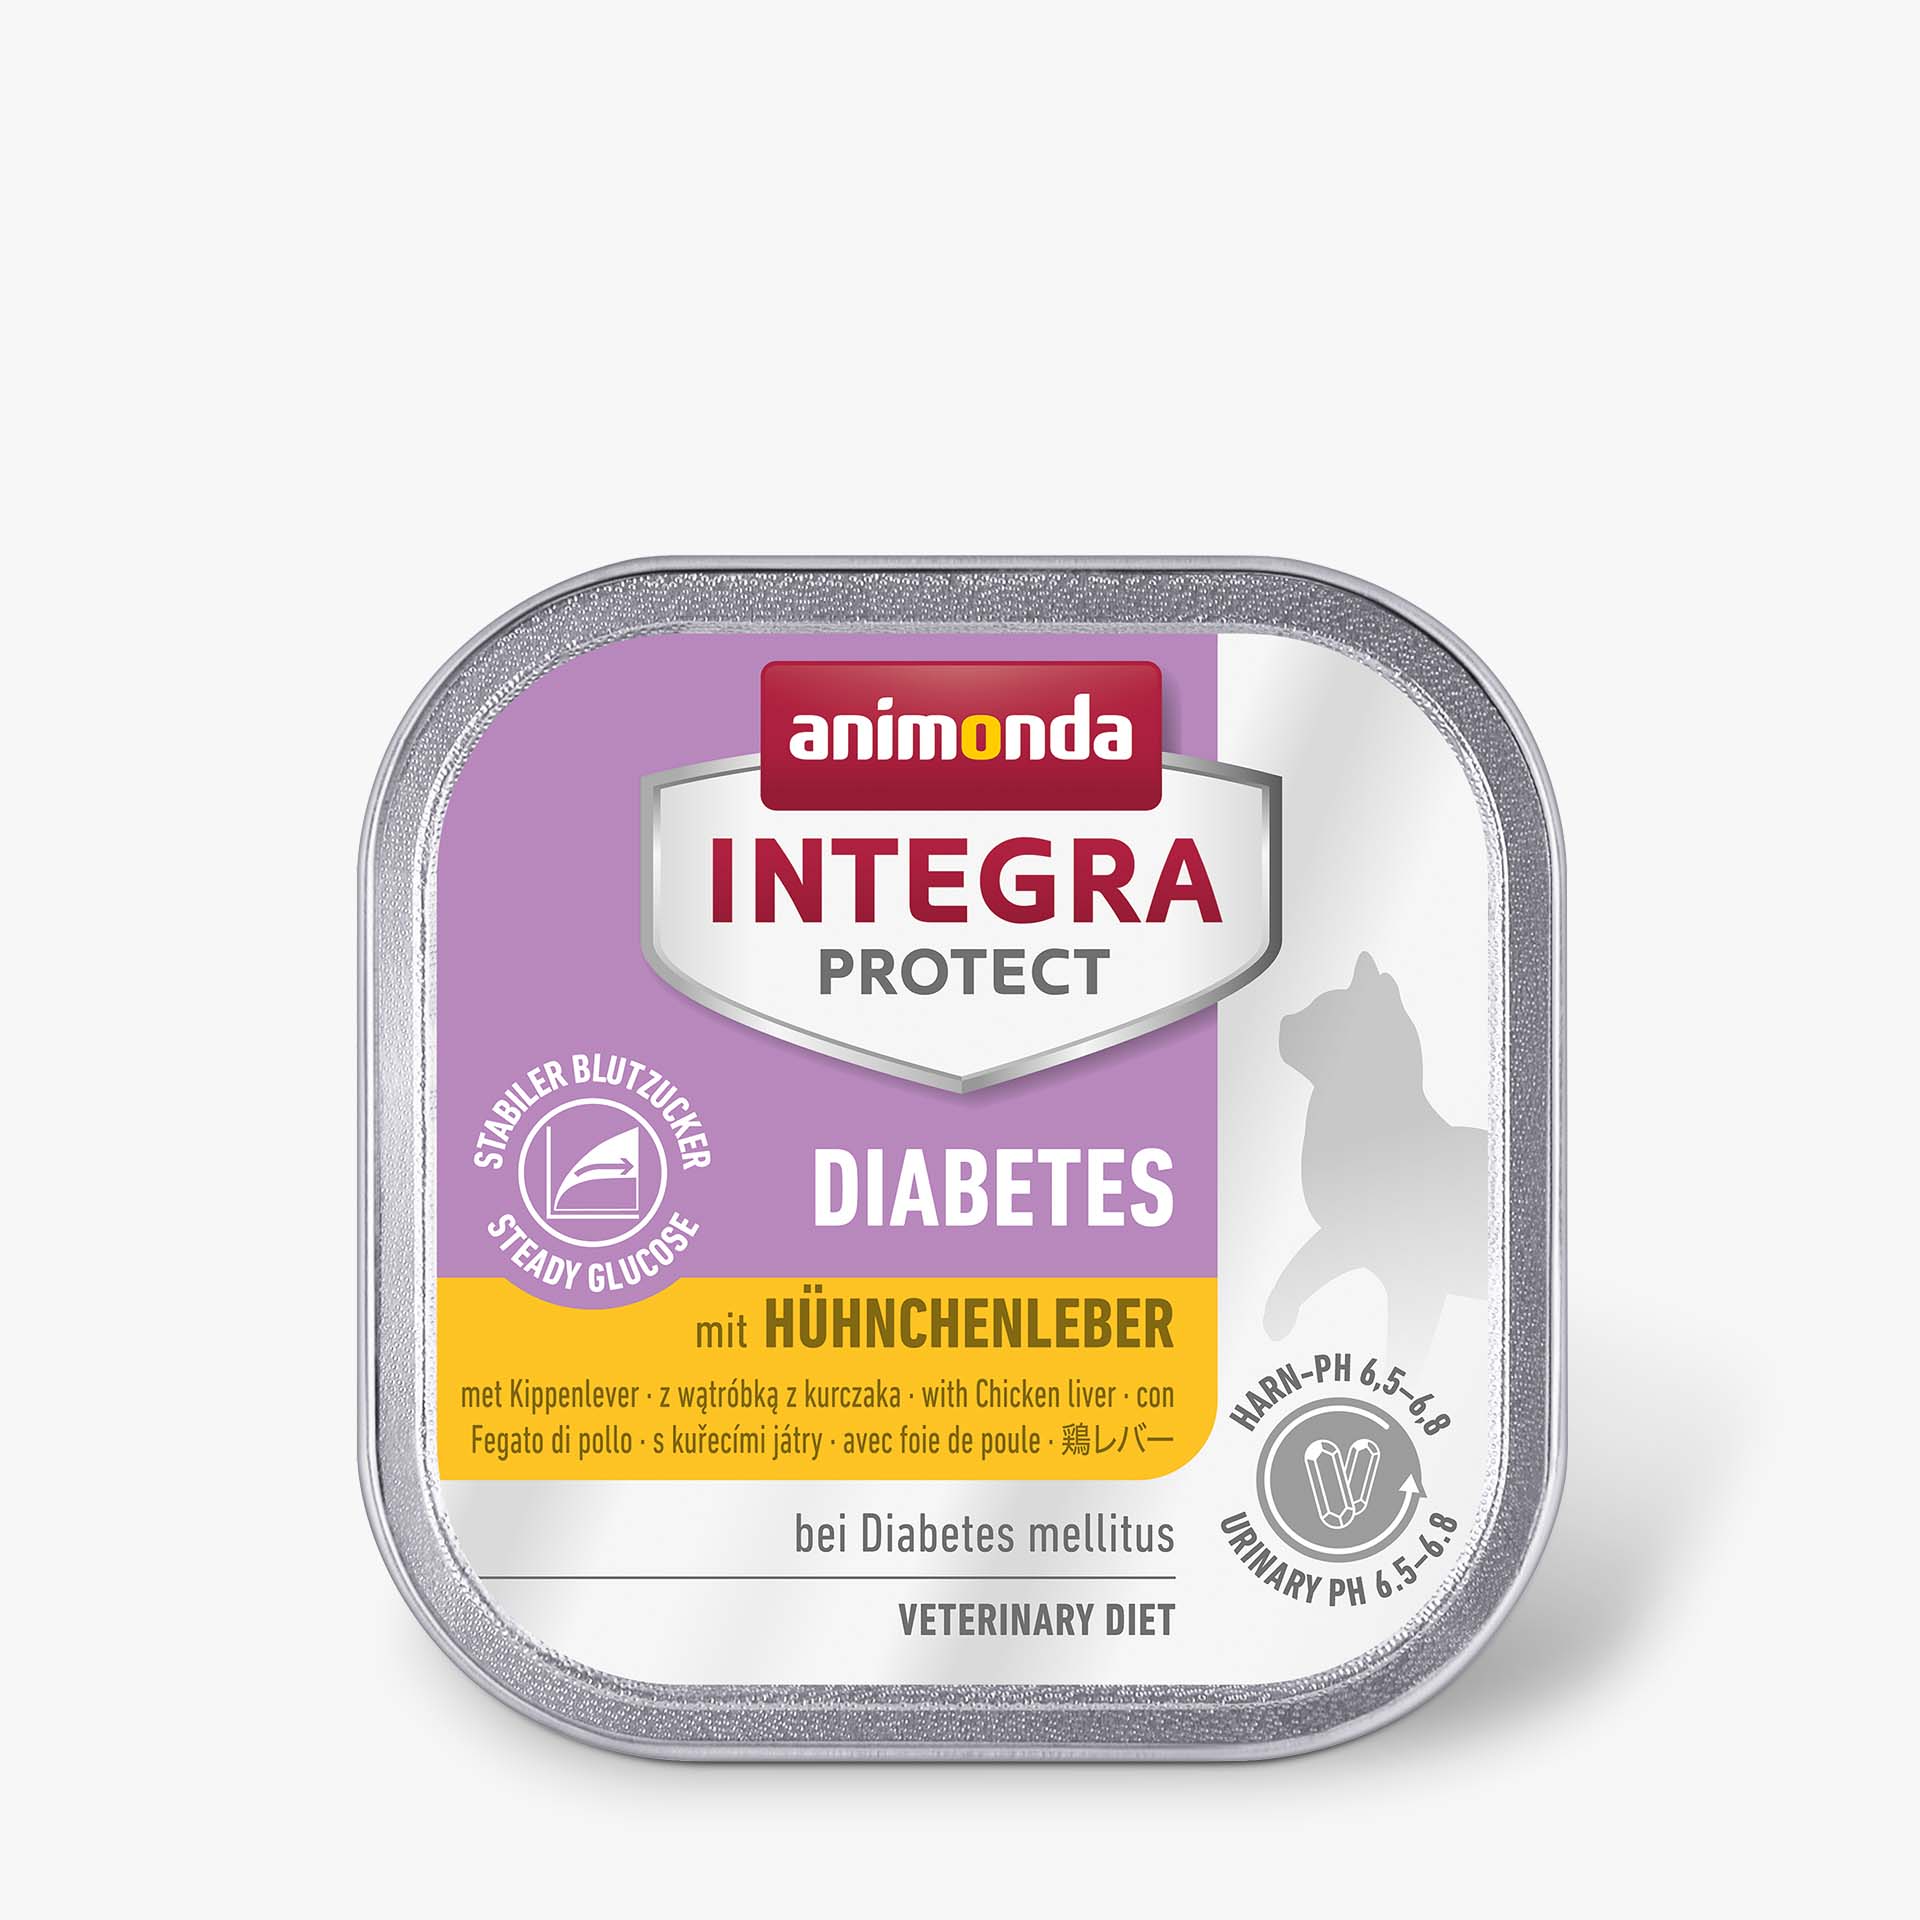 INTEGRA PROTECT with Chicken liver Diabetes